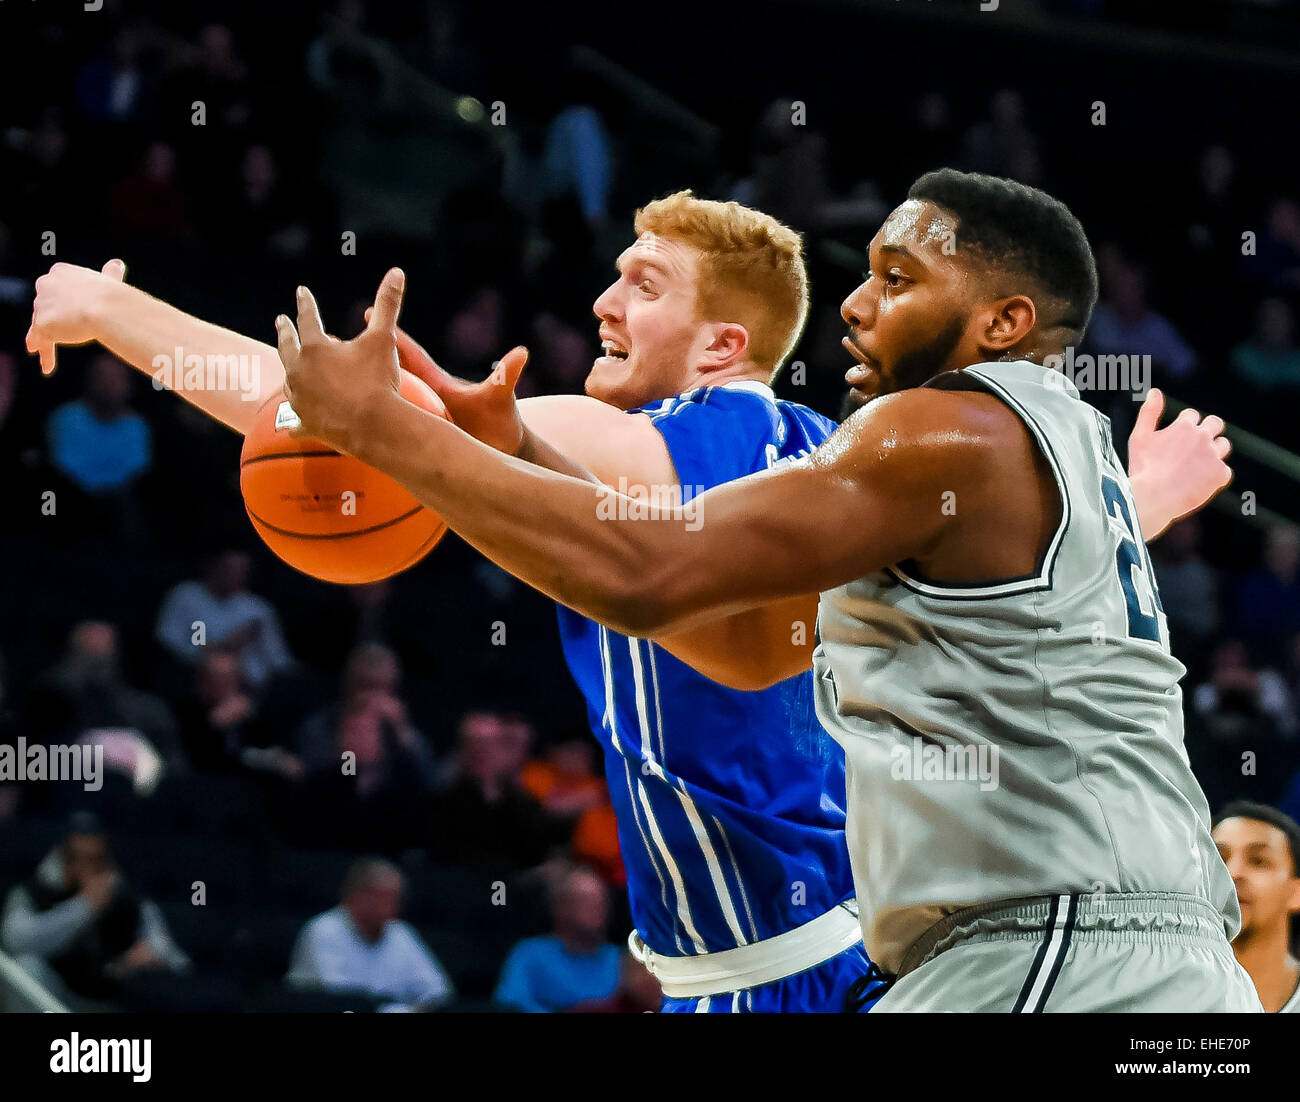 New York, NY, USA. 12th Mar, 2015. March 12, 2015: Creighton junior center Geoffrey Groselle (41) and Georgetown senior center Joshua Smith (24) fight for a rebound during the matchup between the Creighton Bluejays and the Georgetown Hoyas in the Big East Tournament at Madison Square Garden in New York, New York. Scott Serio/CSM/Alamy Live News Stock Photo